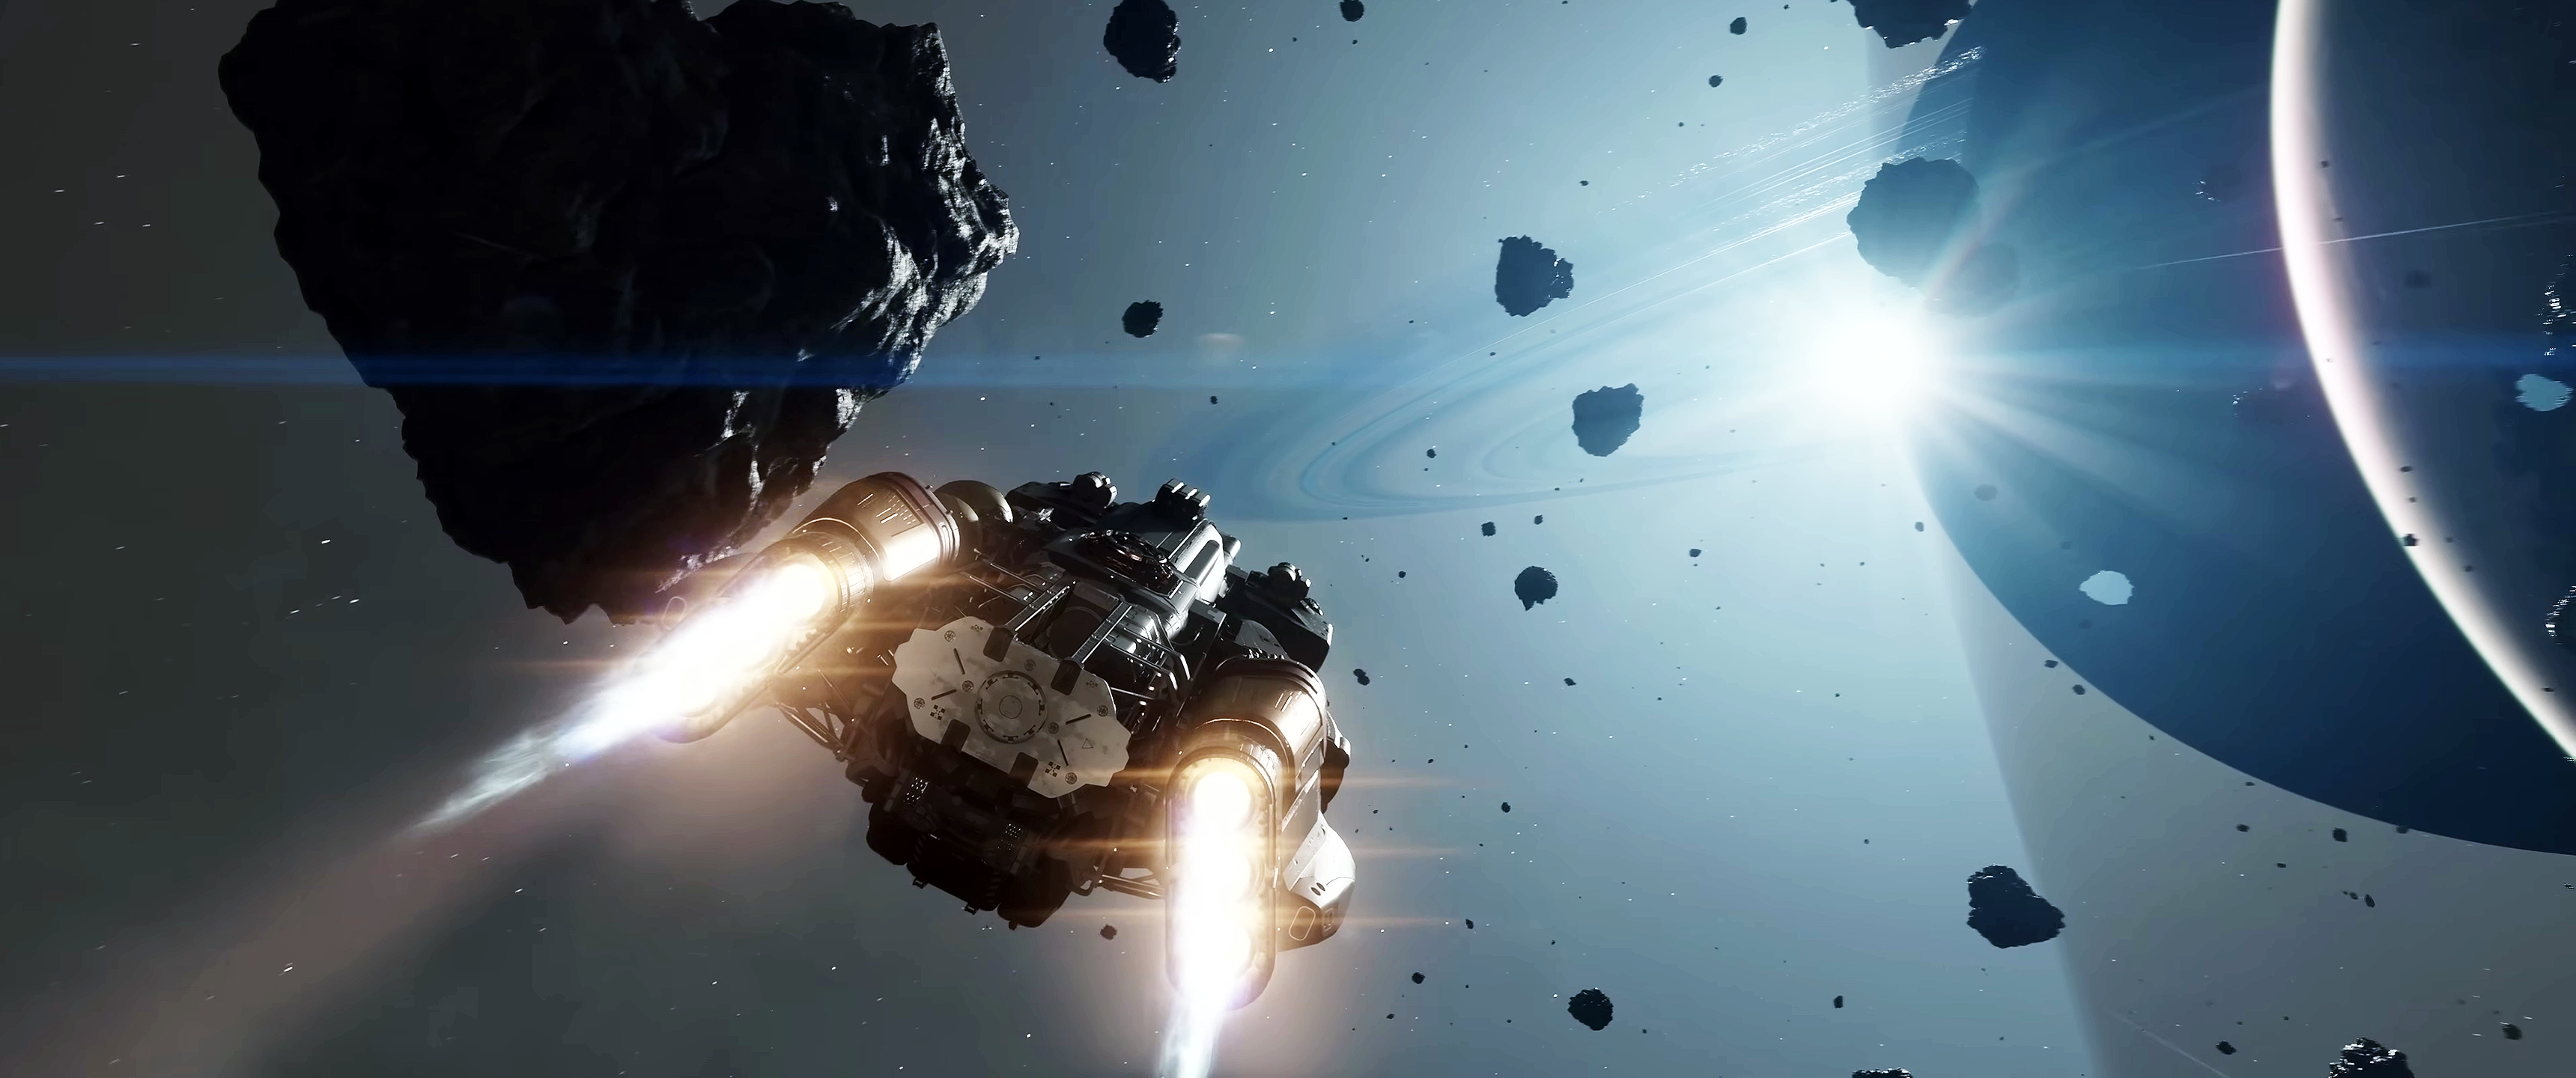 General 3440x1440 Starfield (video game) Bethesda Softworks space video games spaceship stars asteroid planet CGI